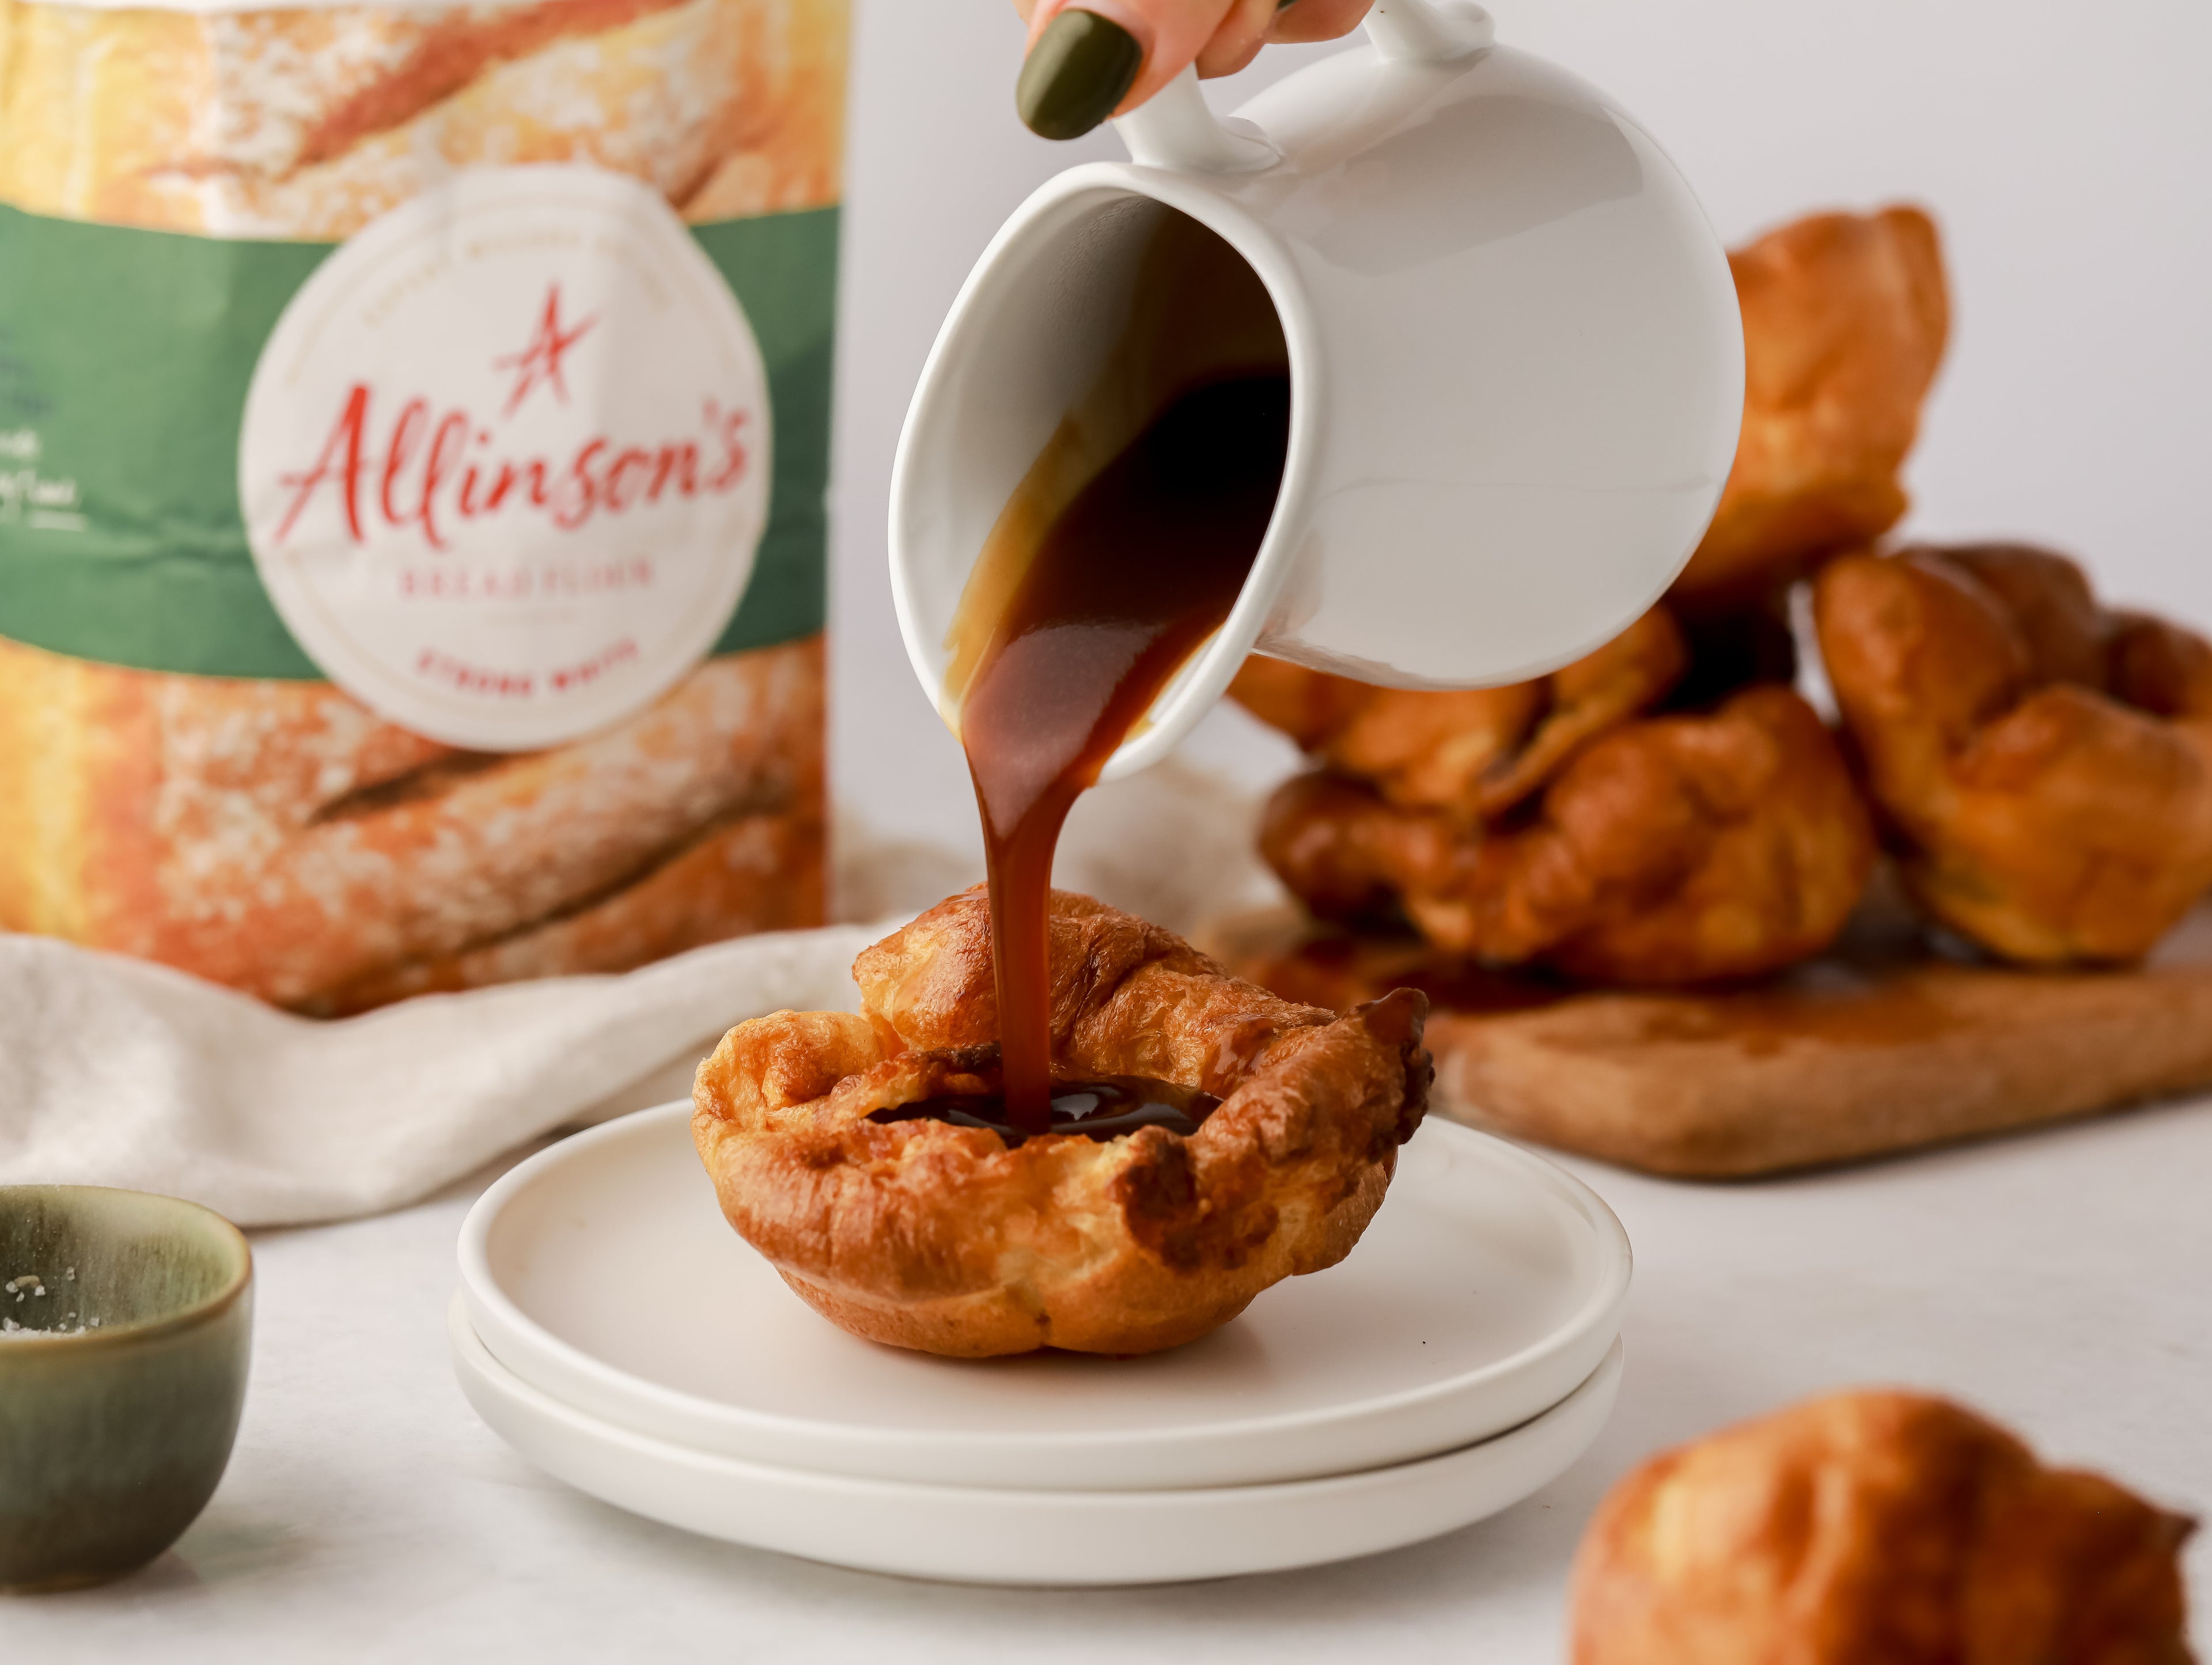 Gravy being poured from a jug into a yorkshire pudding. More yorkshire puddings in the background beside a bag of flour